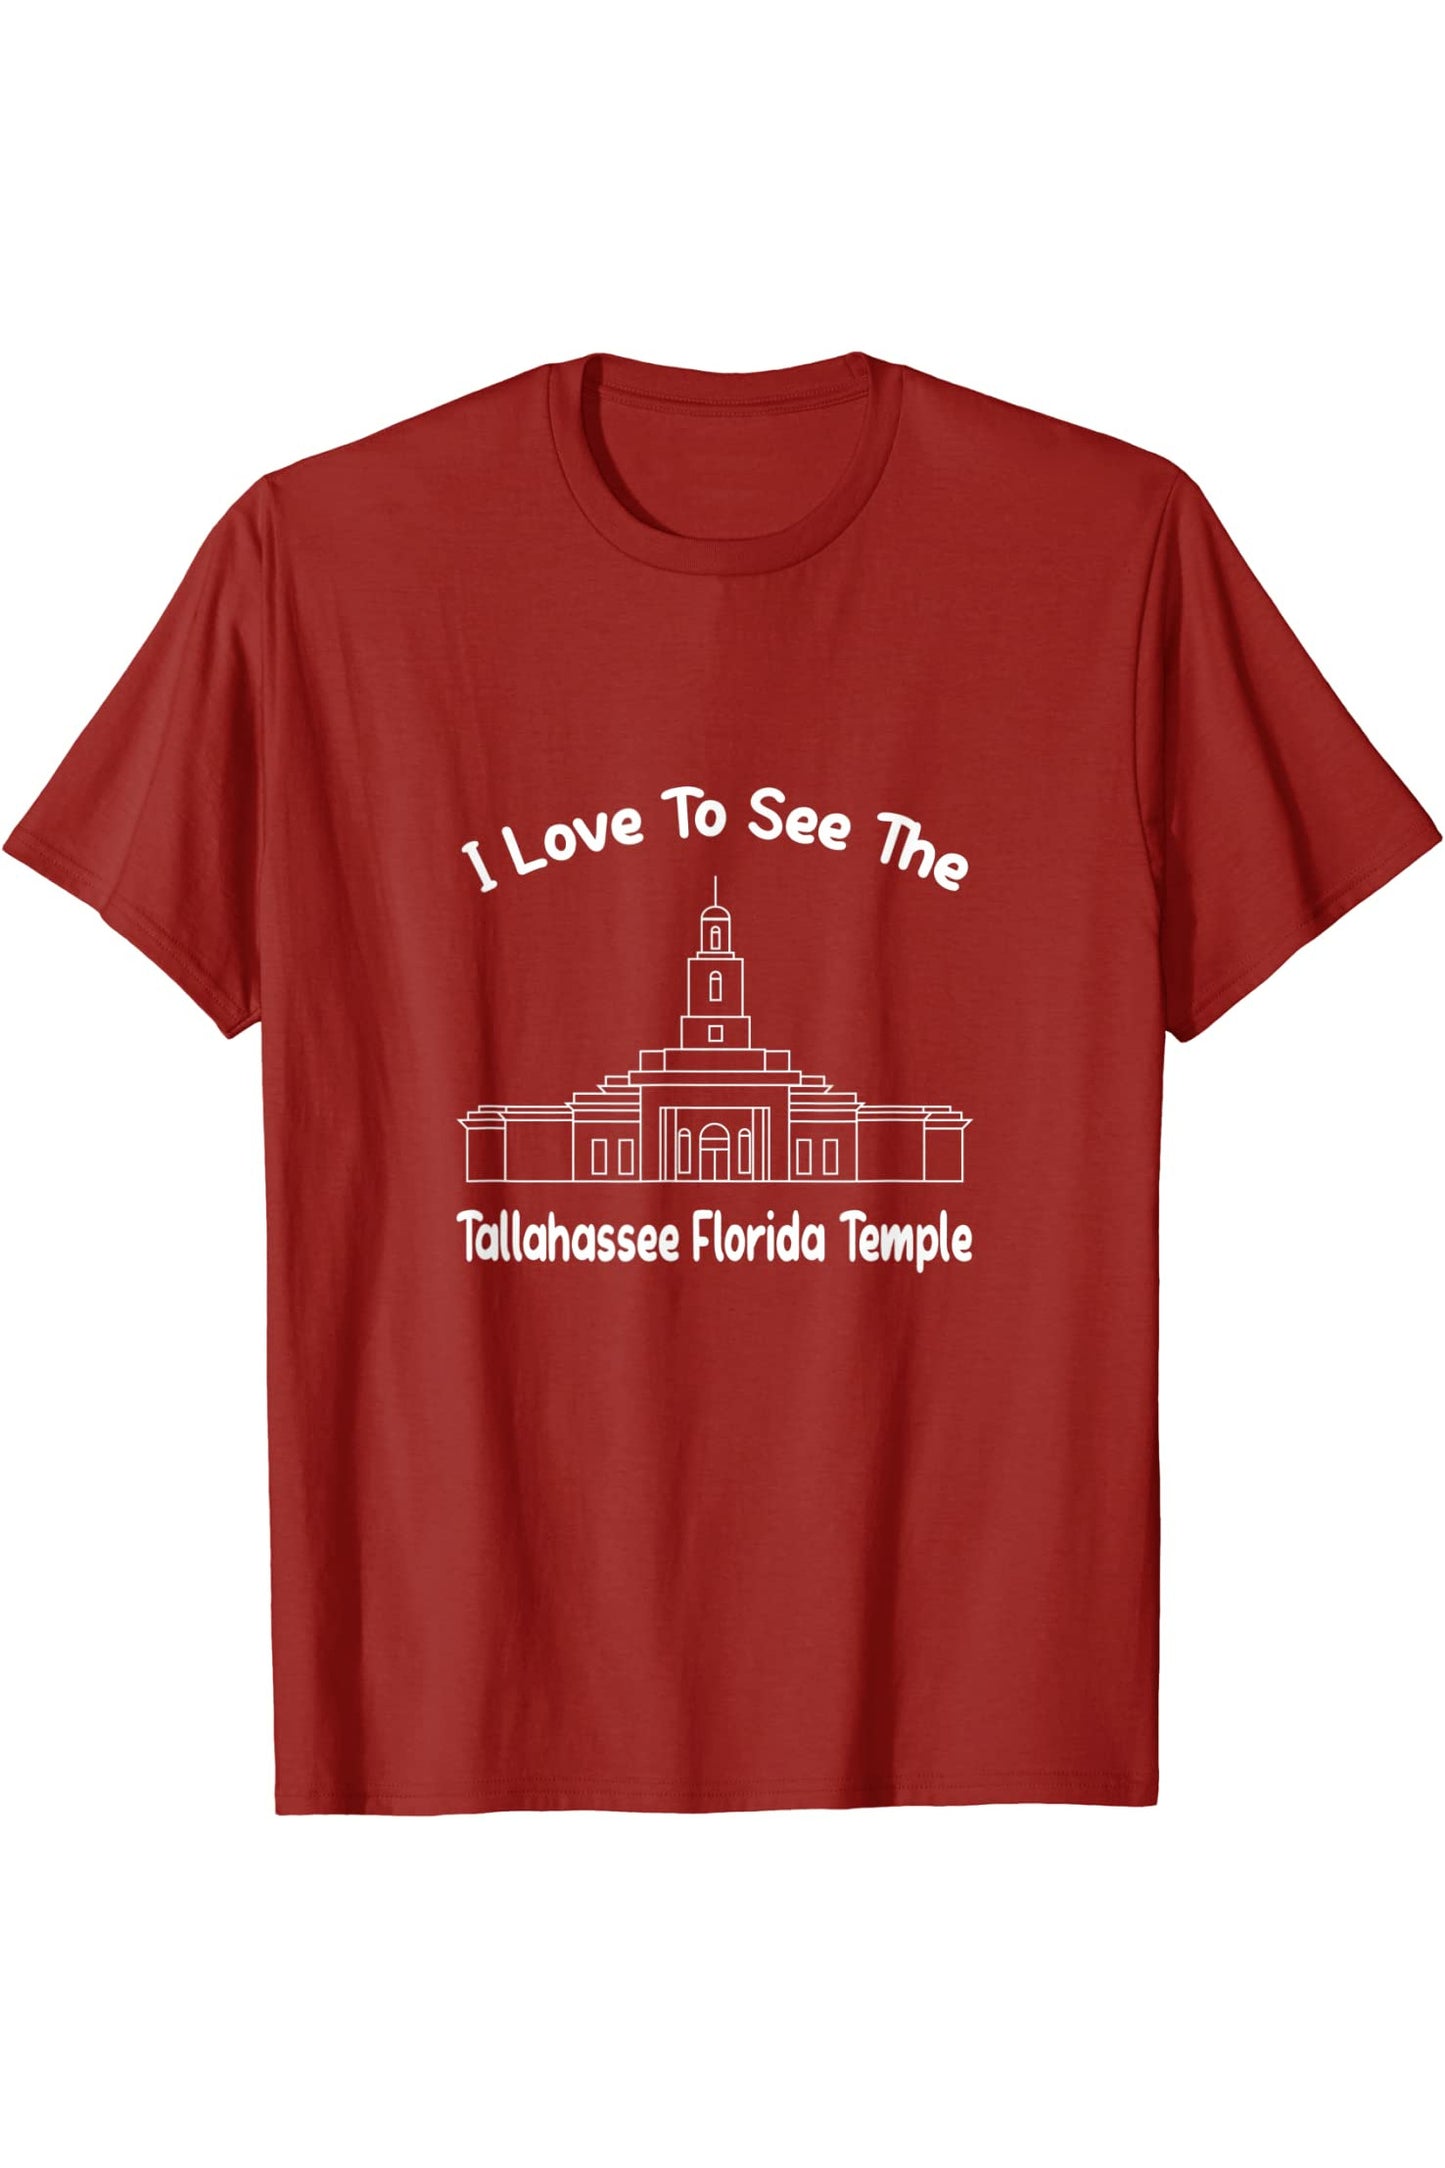 Tallahassee Florida Temple T-Shirt - Primary Style (English) US